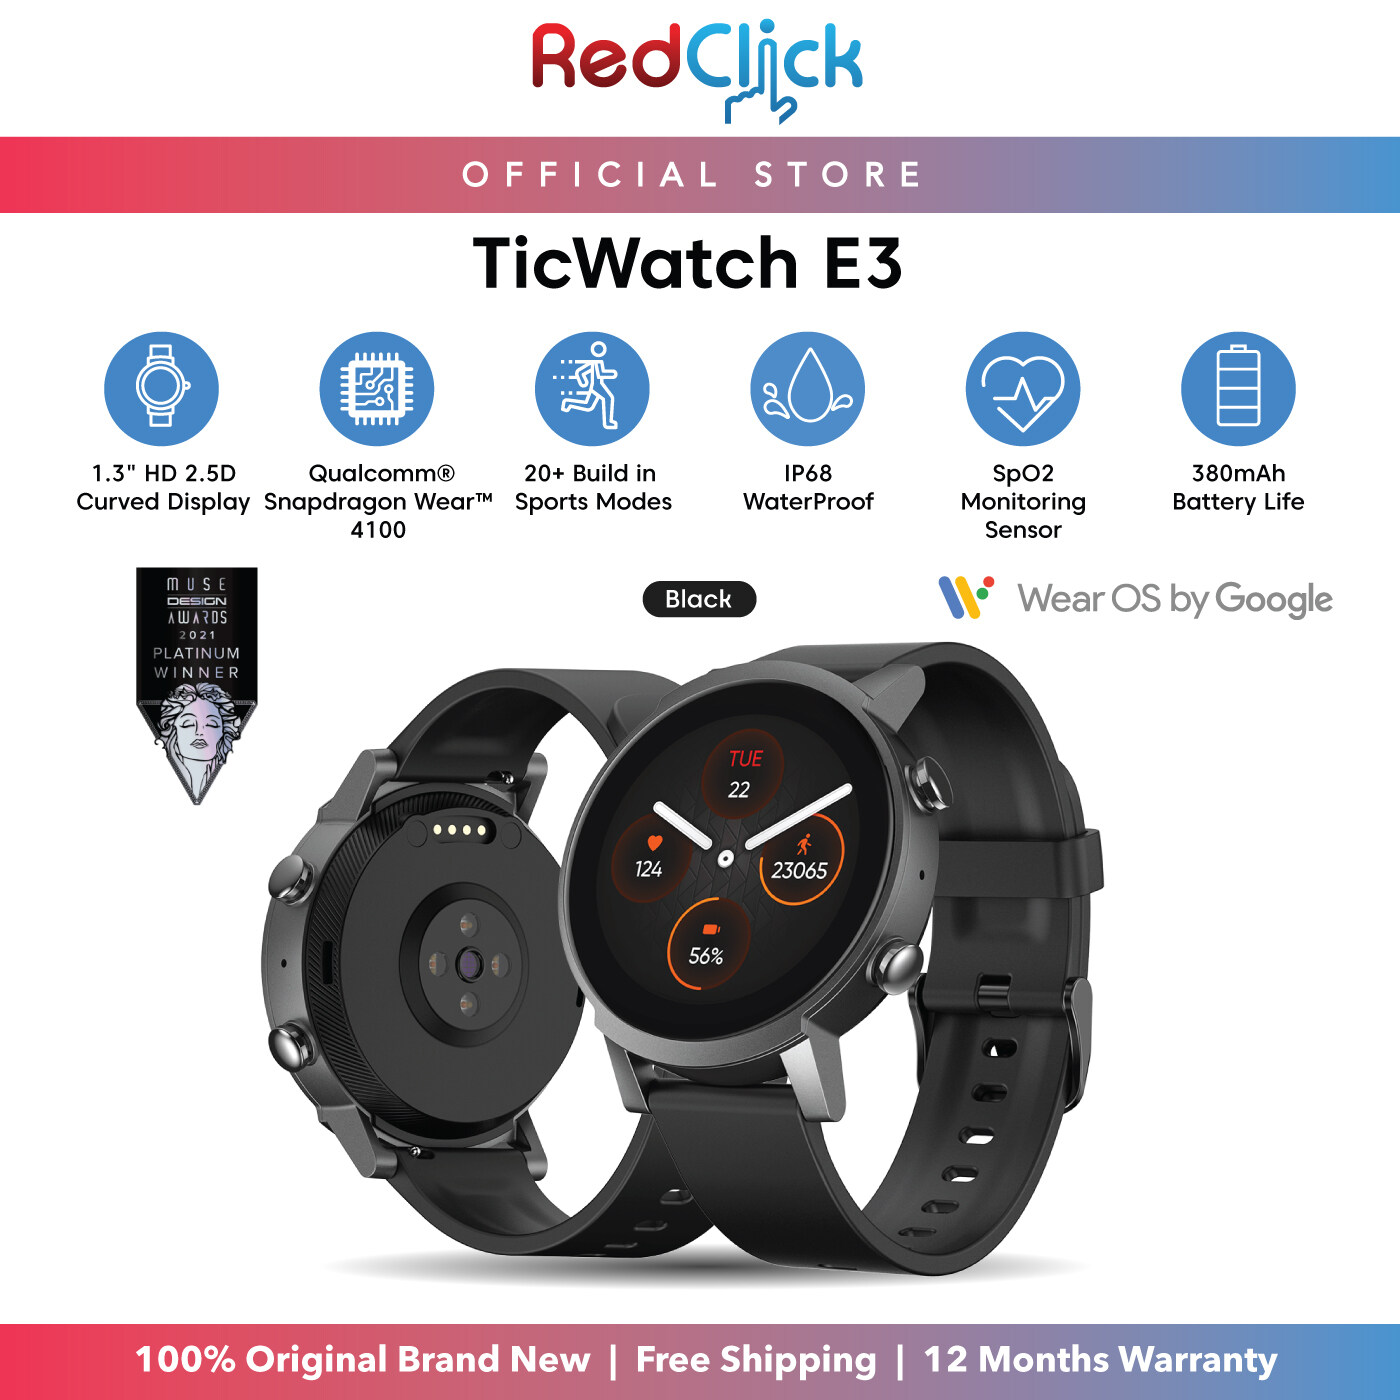 Mobvoi TicWatch E3 1.3" HD Curved Display Built In Sport Modes IP68 Waterproof Compatible with Mobvoi App